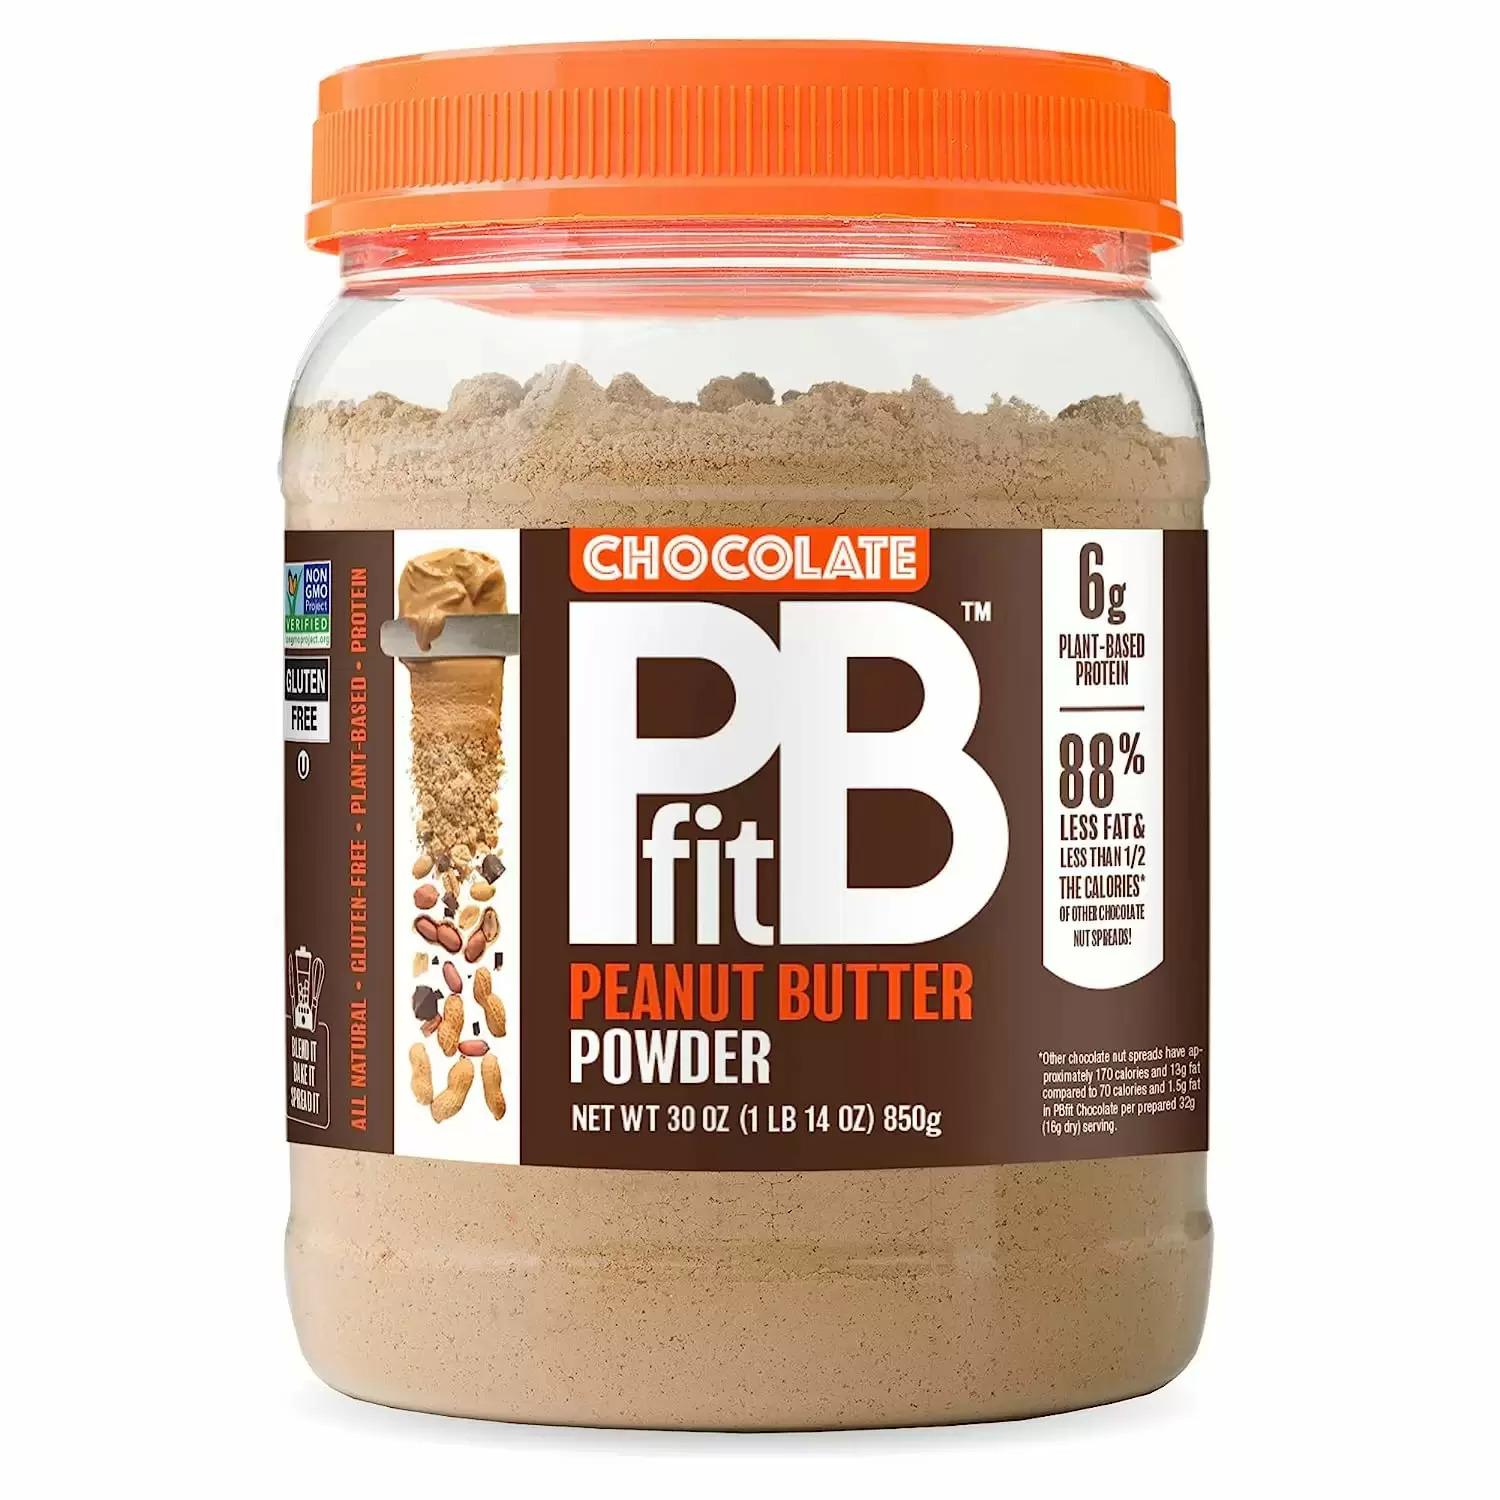 PBfit All-Natural Peanut Butter Chocolate Powder for $8.23